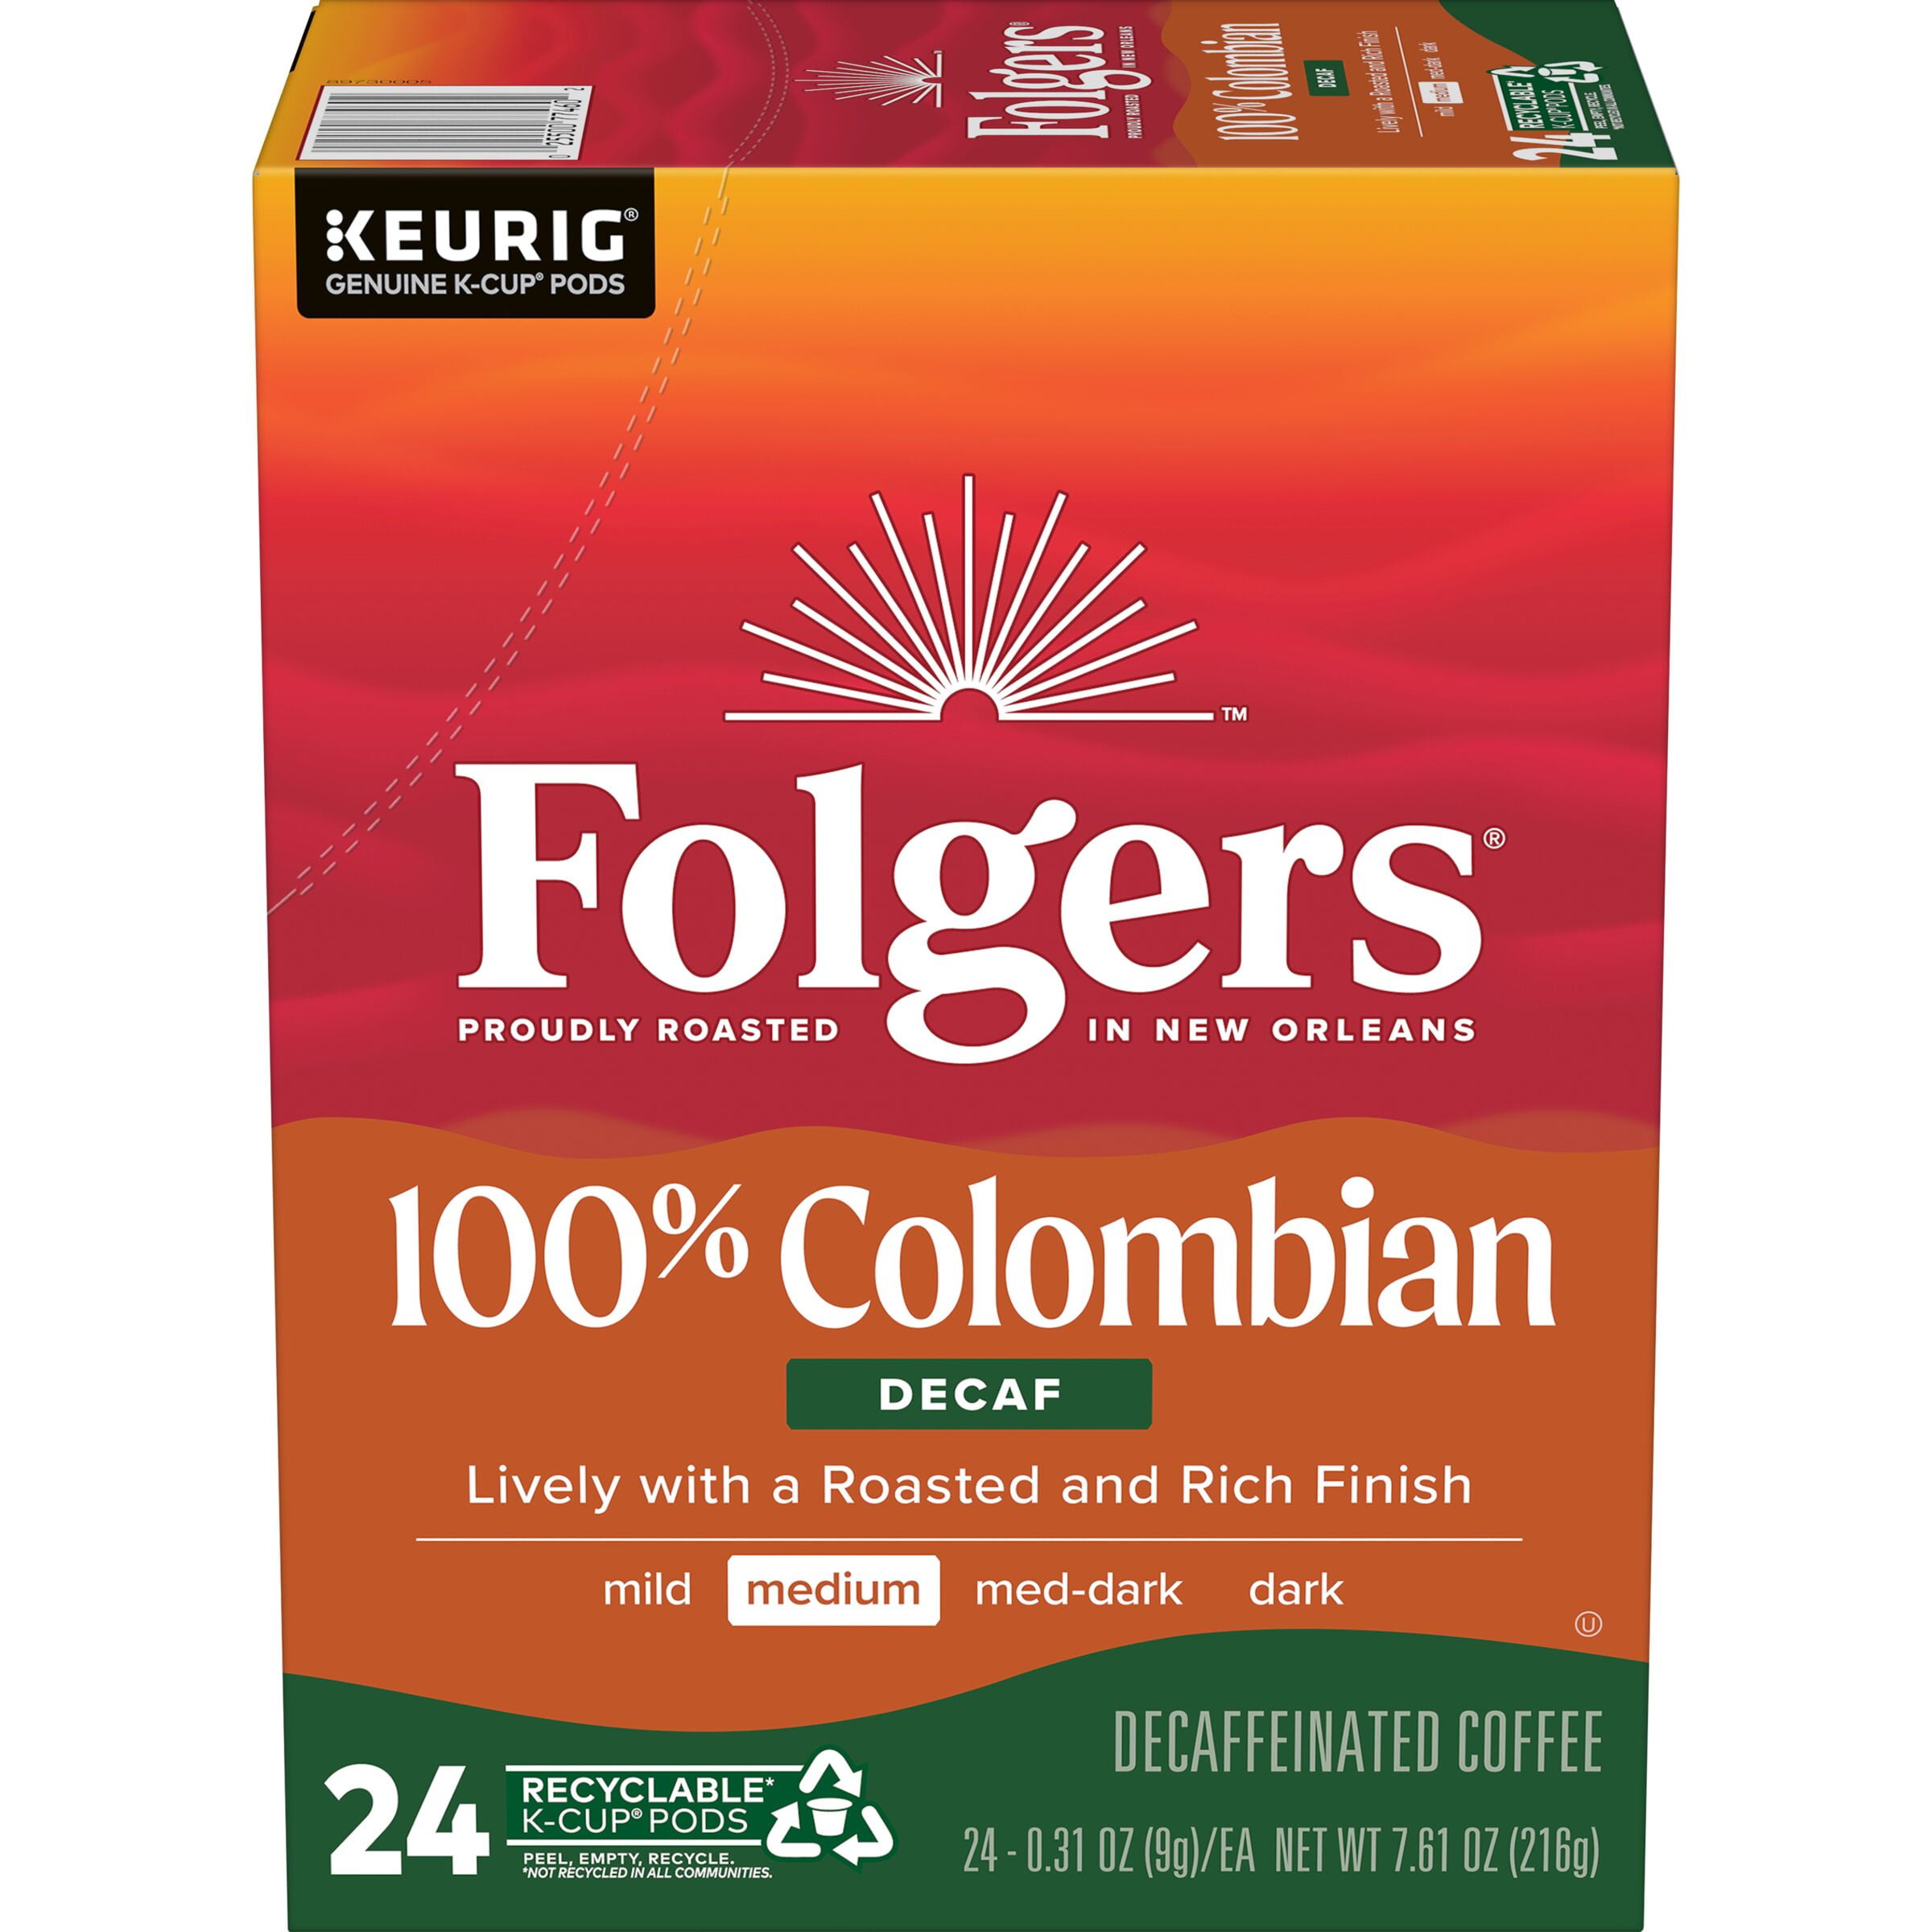 Folgers 0570 100% Colombian Decaf Coffee K-Cups (24/Box)